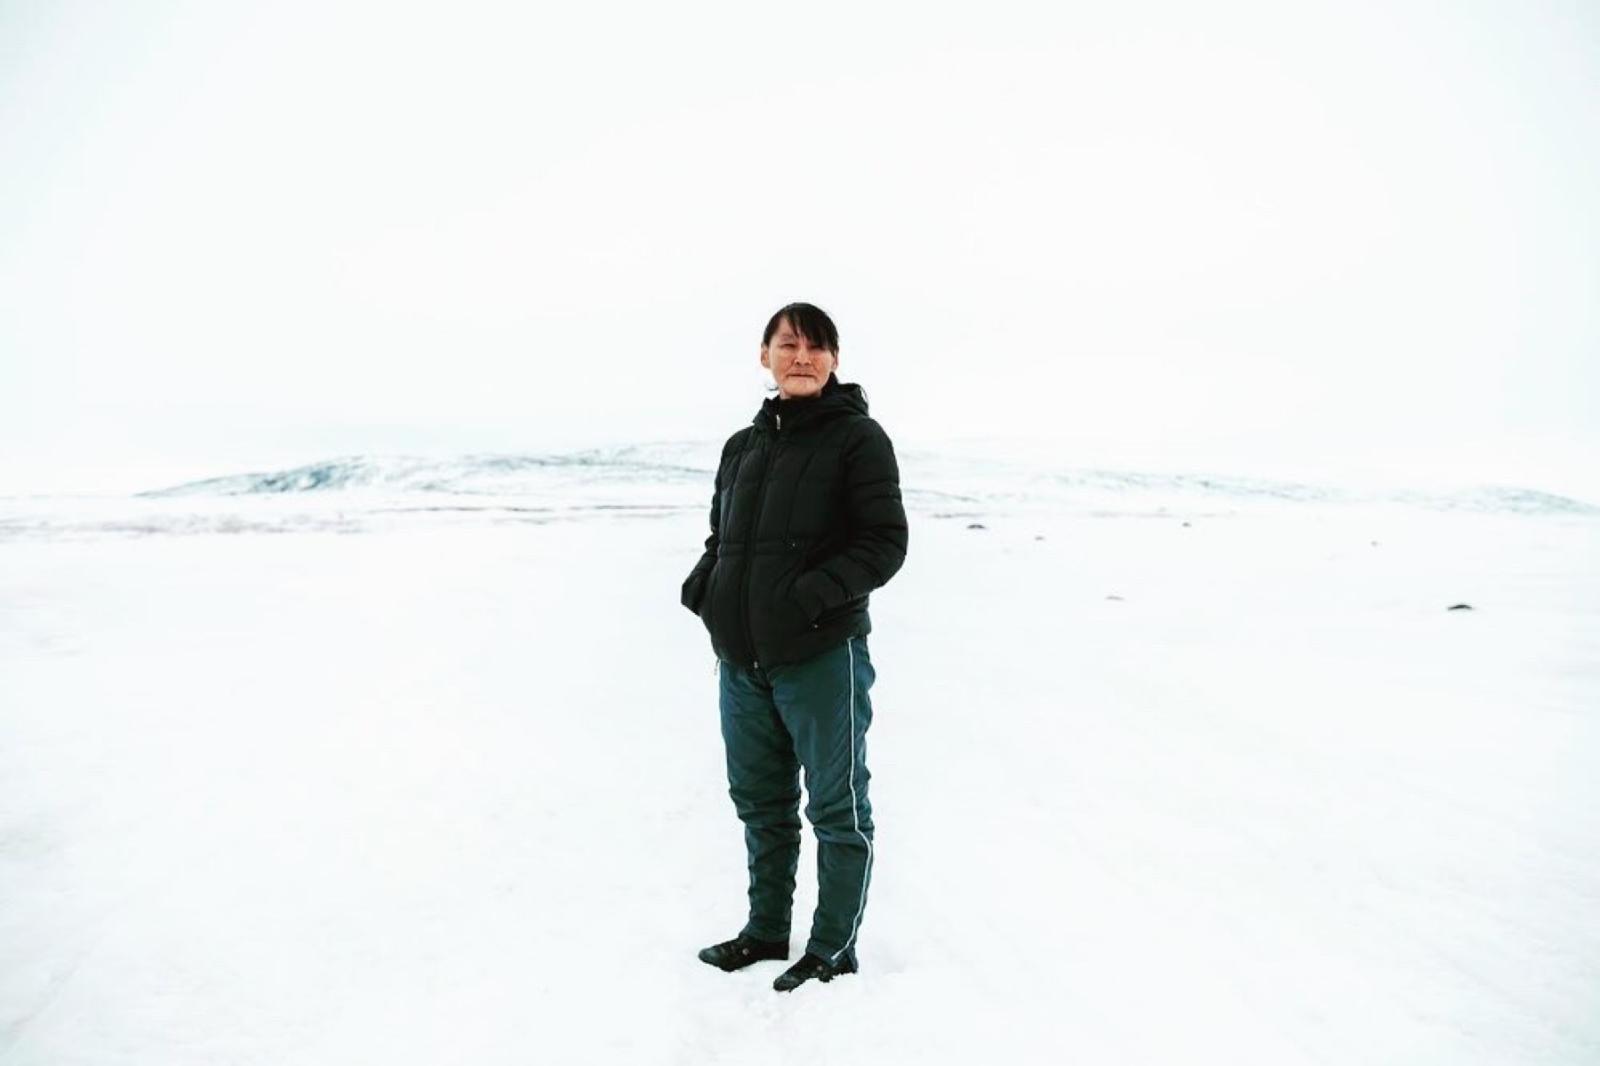 The Globe & Mail: Mental-health support is scarce in Nunavut, but an Inuit-language counsellor training program could change that